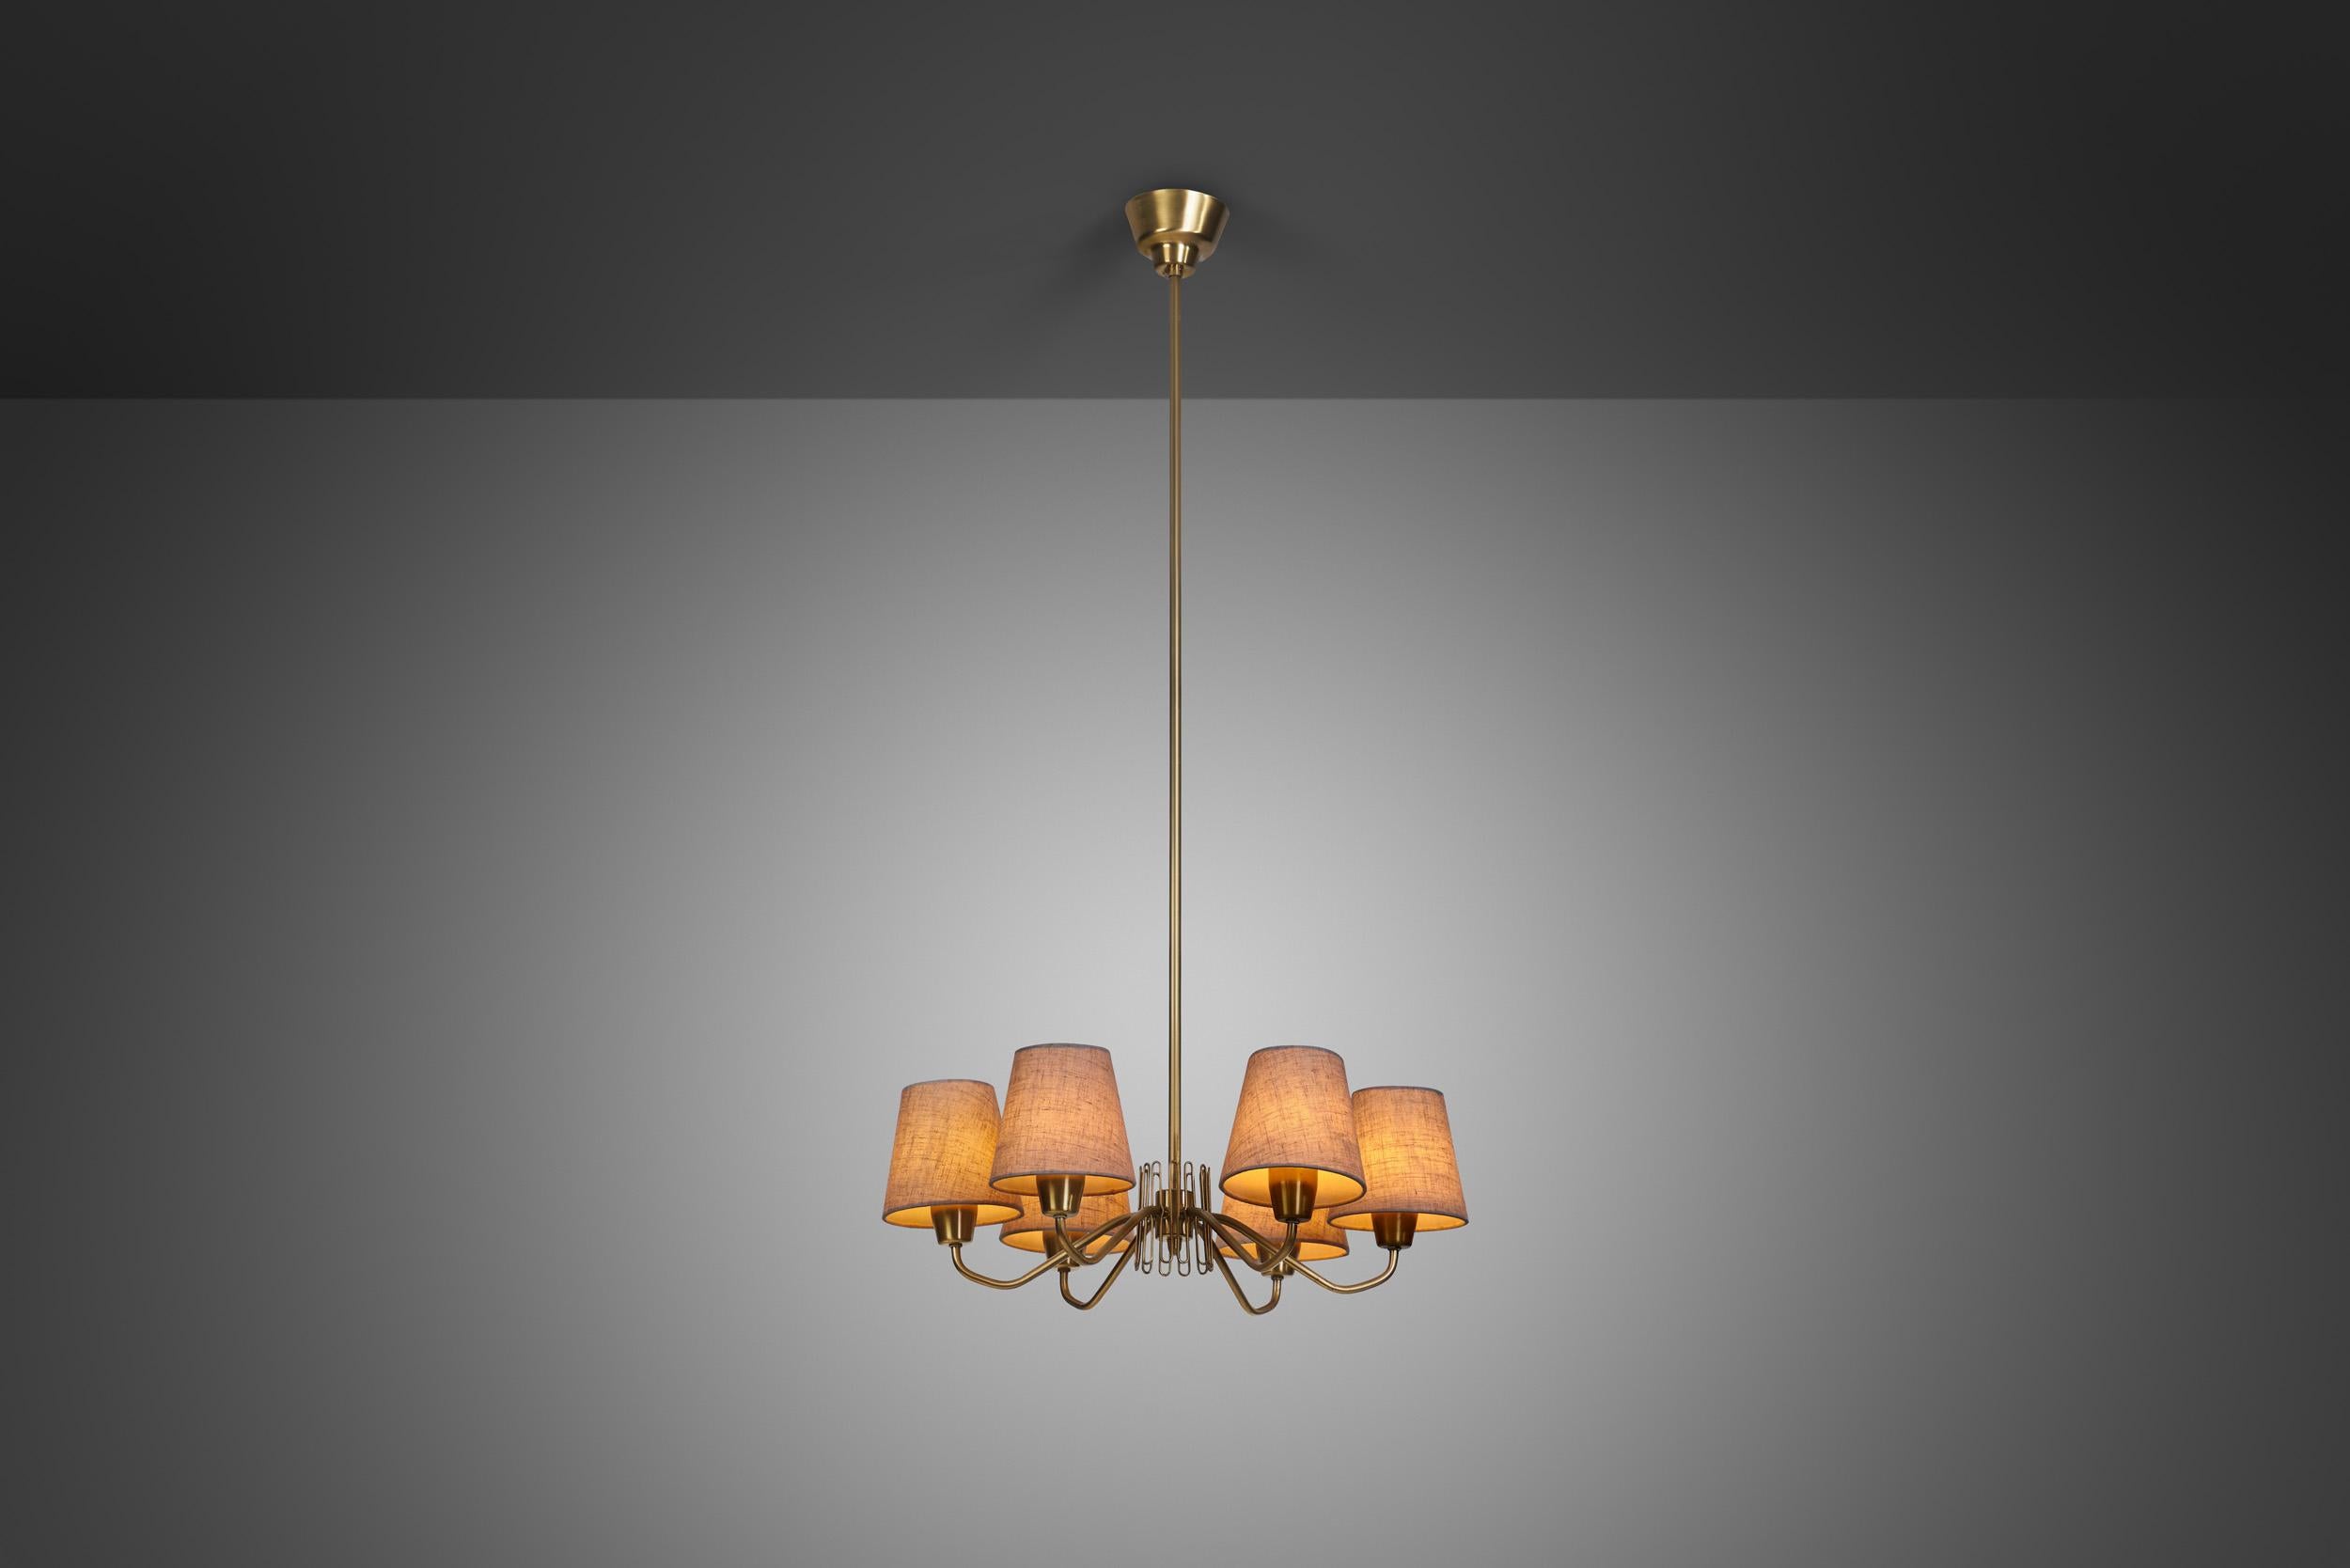 ‎‎Ceiling lighting has been used as a decorative focal point for rooms since the early 20th century. In Scandinavian mid-century design, where interior lighting is of particular importance, designers managed to master the art of soft light without